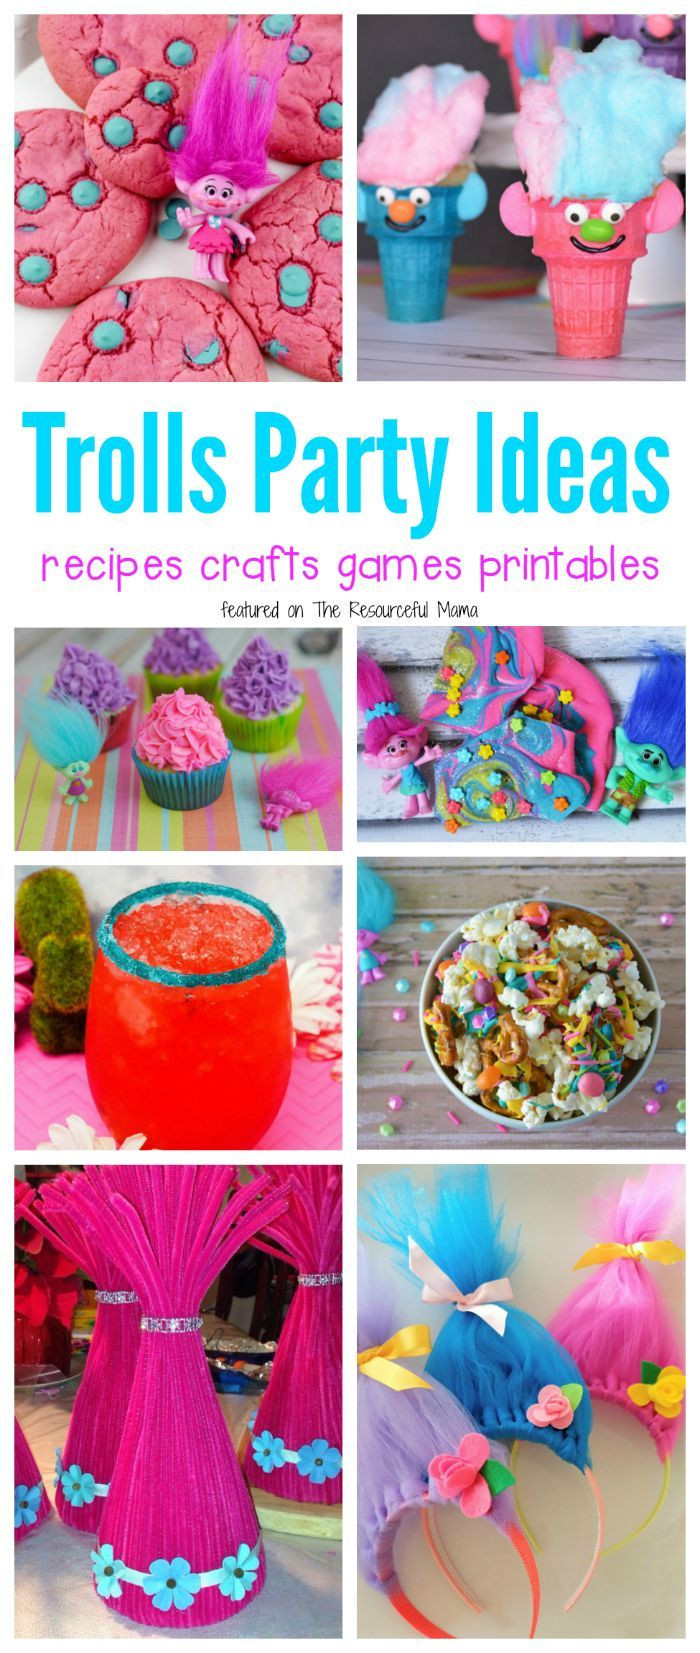 Food Ideas For A Troll Party
 Fun Filled Trolls Party Ideas Kids Parties